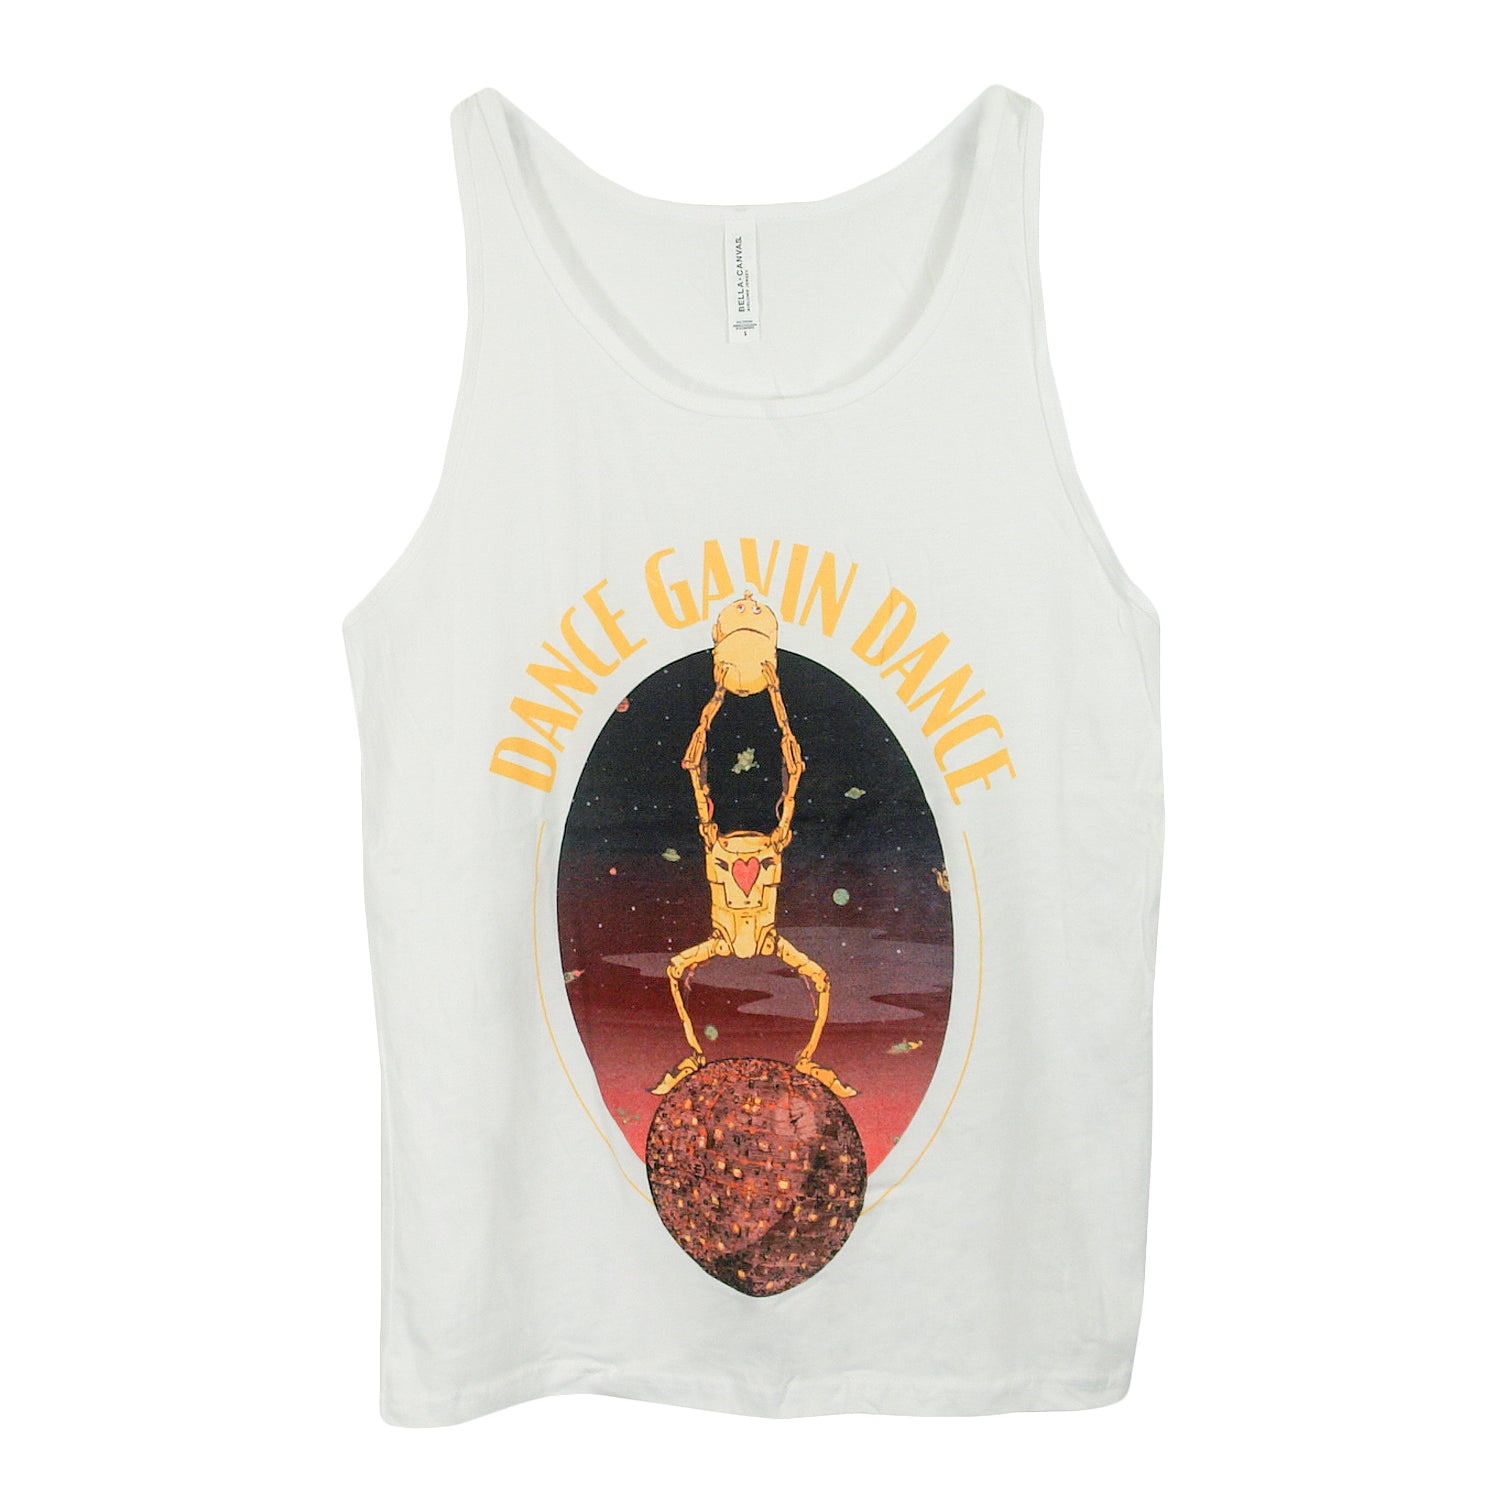 image of a white tank top on a white background. tank has full body print. arched at the top in yellow says dance gavin dance. below that is a robot standing on a sphere holding something above its head